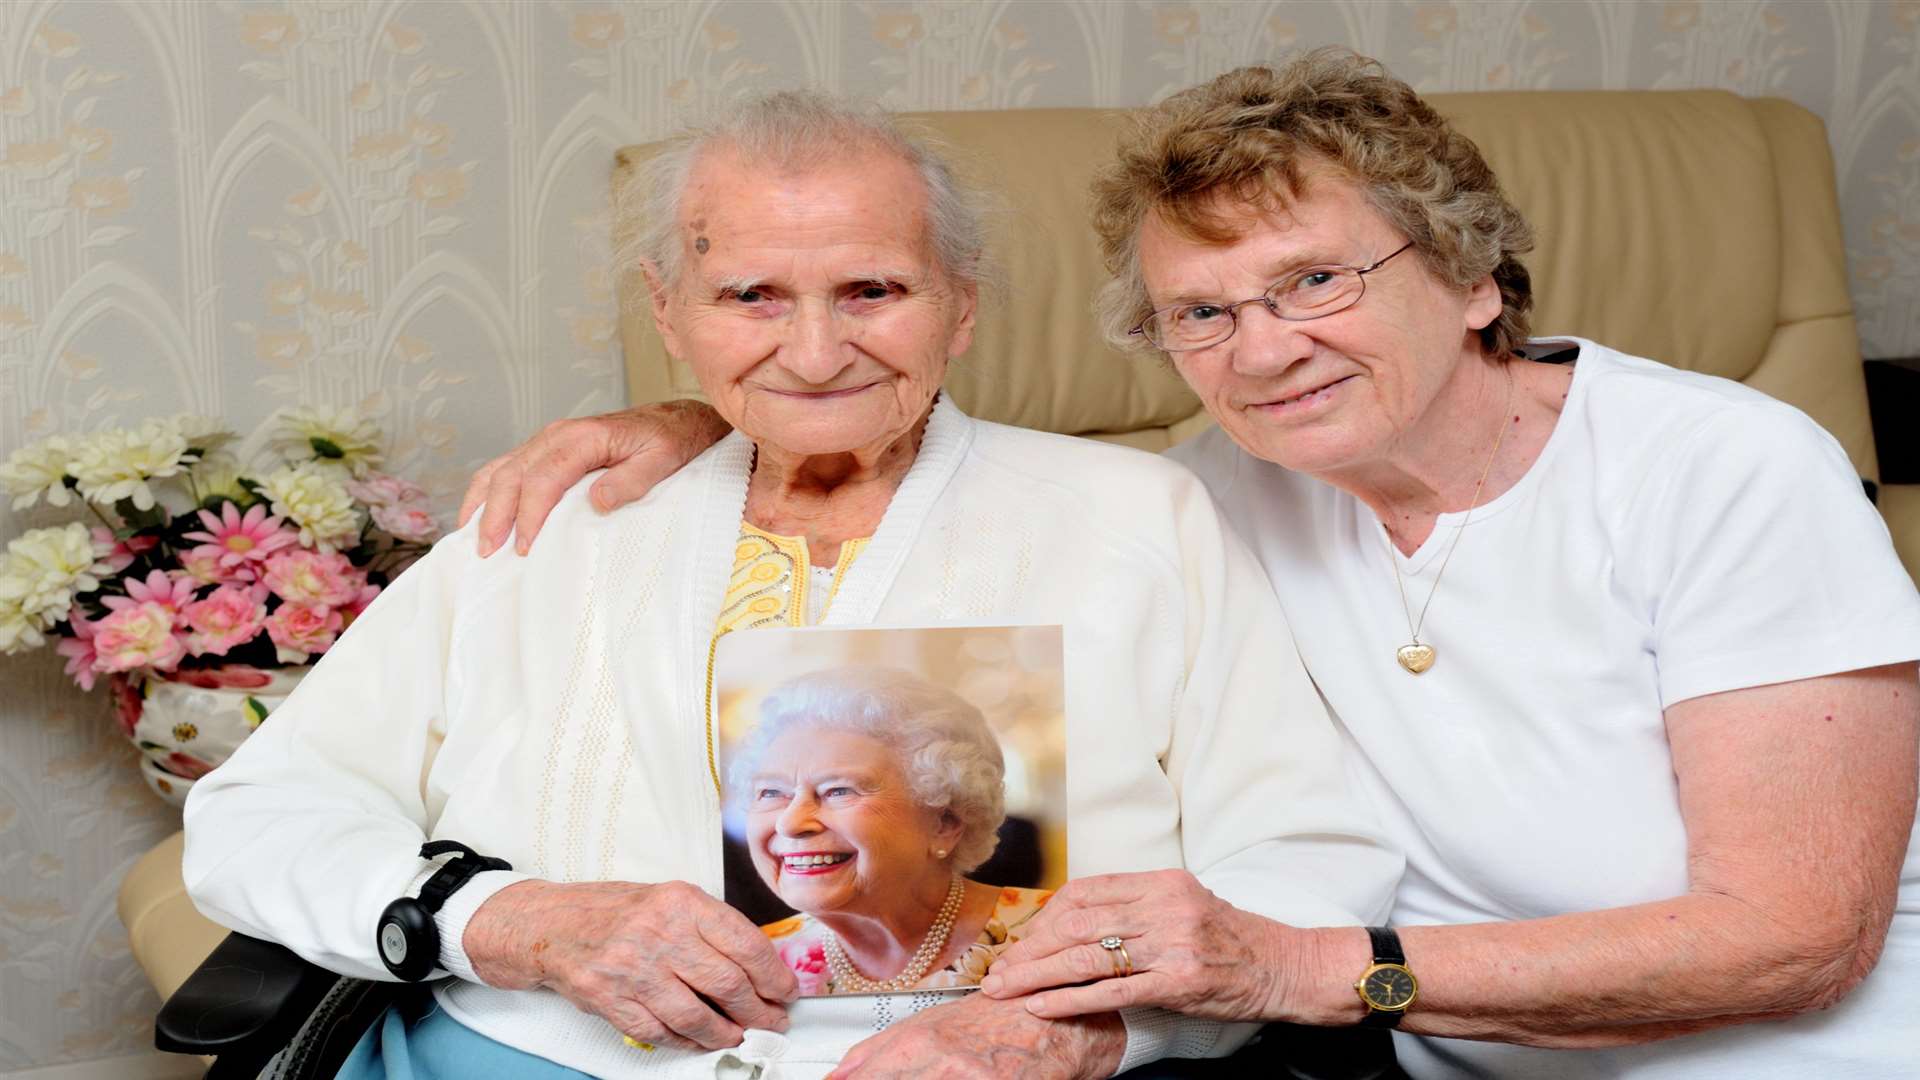 Cecilia Larner, celebrating her 107th birthday with a card from the Queen, with her daughter Sheila Bodle